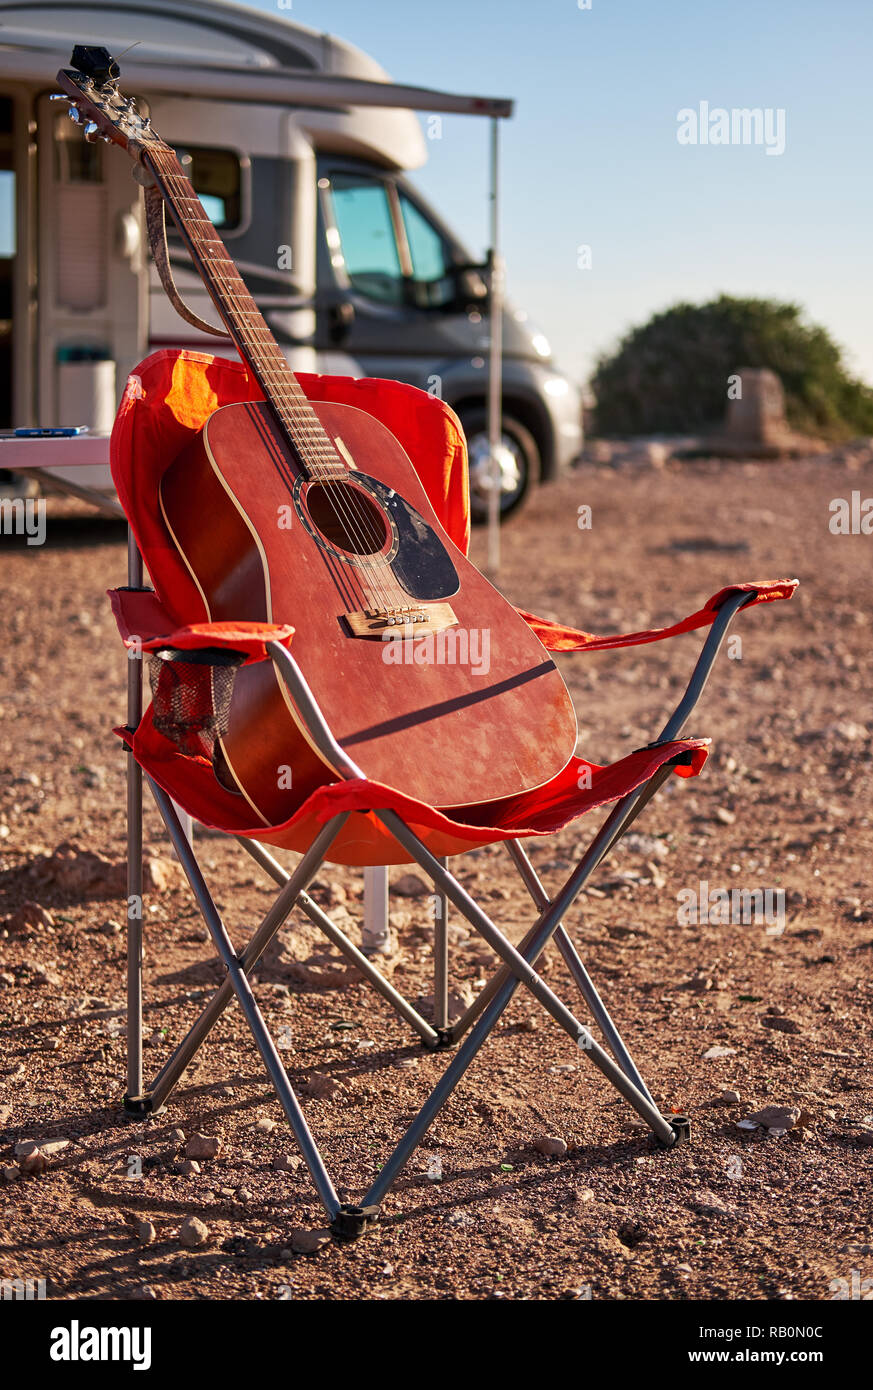 Vertical view red acoustic guitar on a folding chair near recreational vehicle motor home trailer, no people. Hobby traveling and lifestyle concept Stock Photo